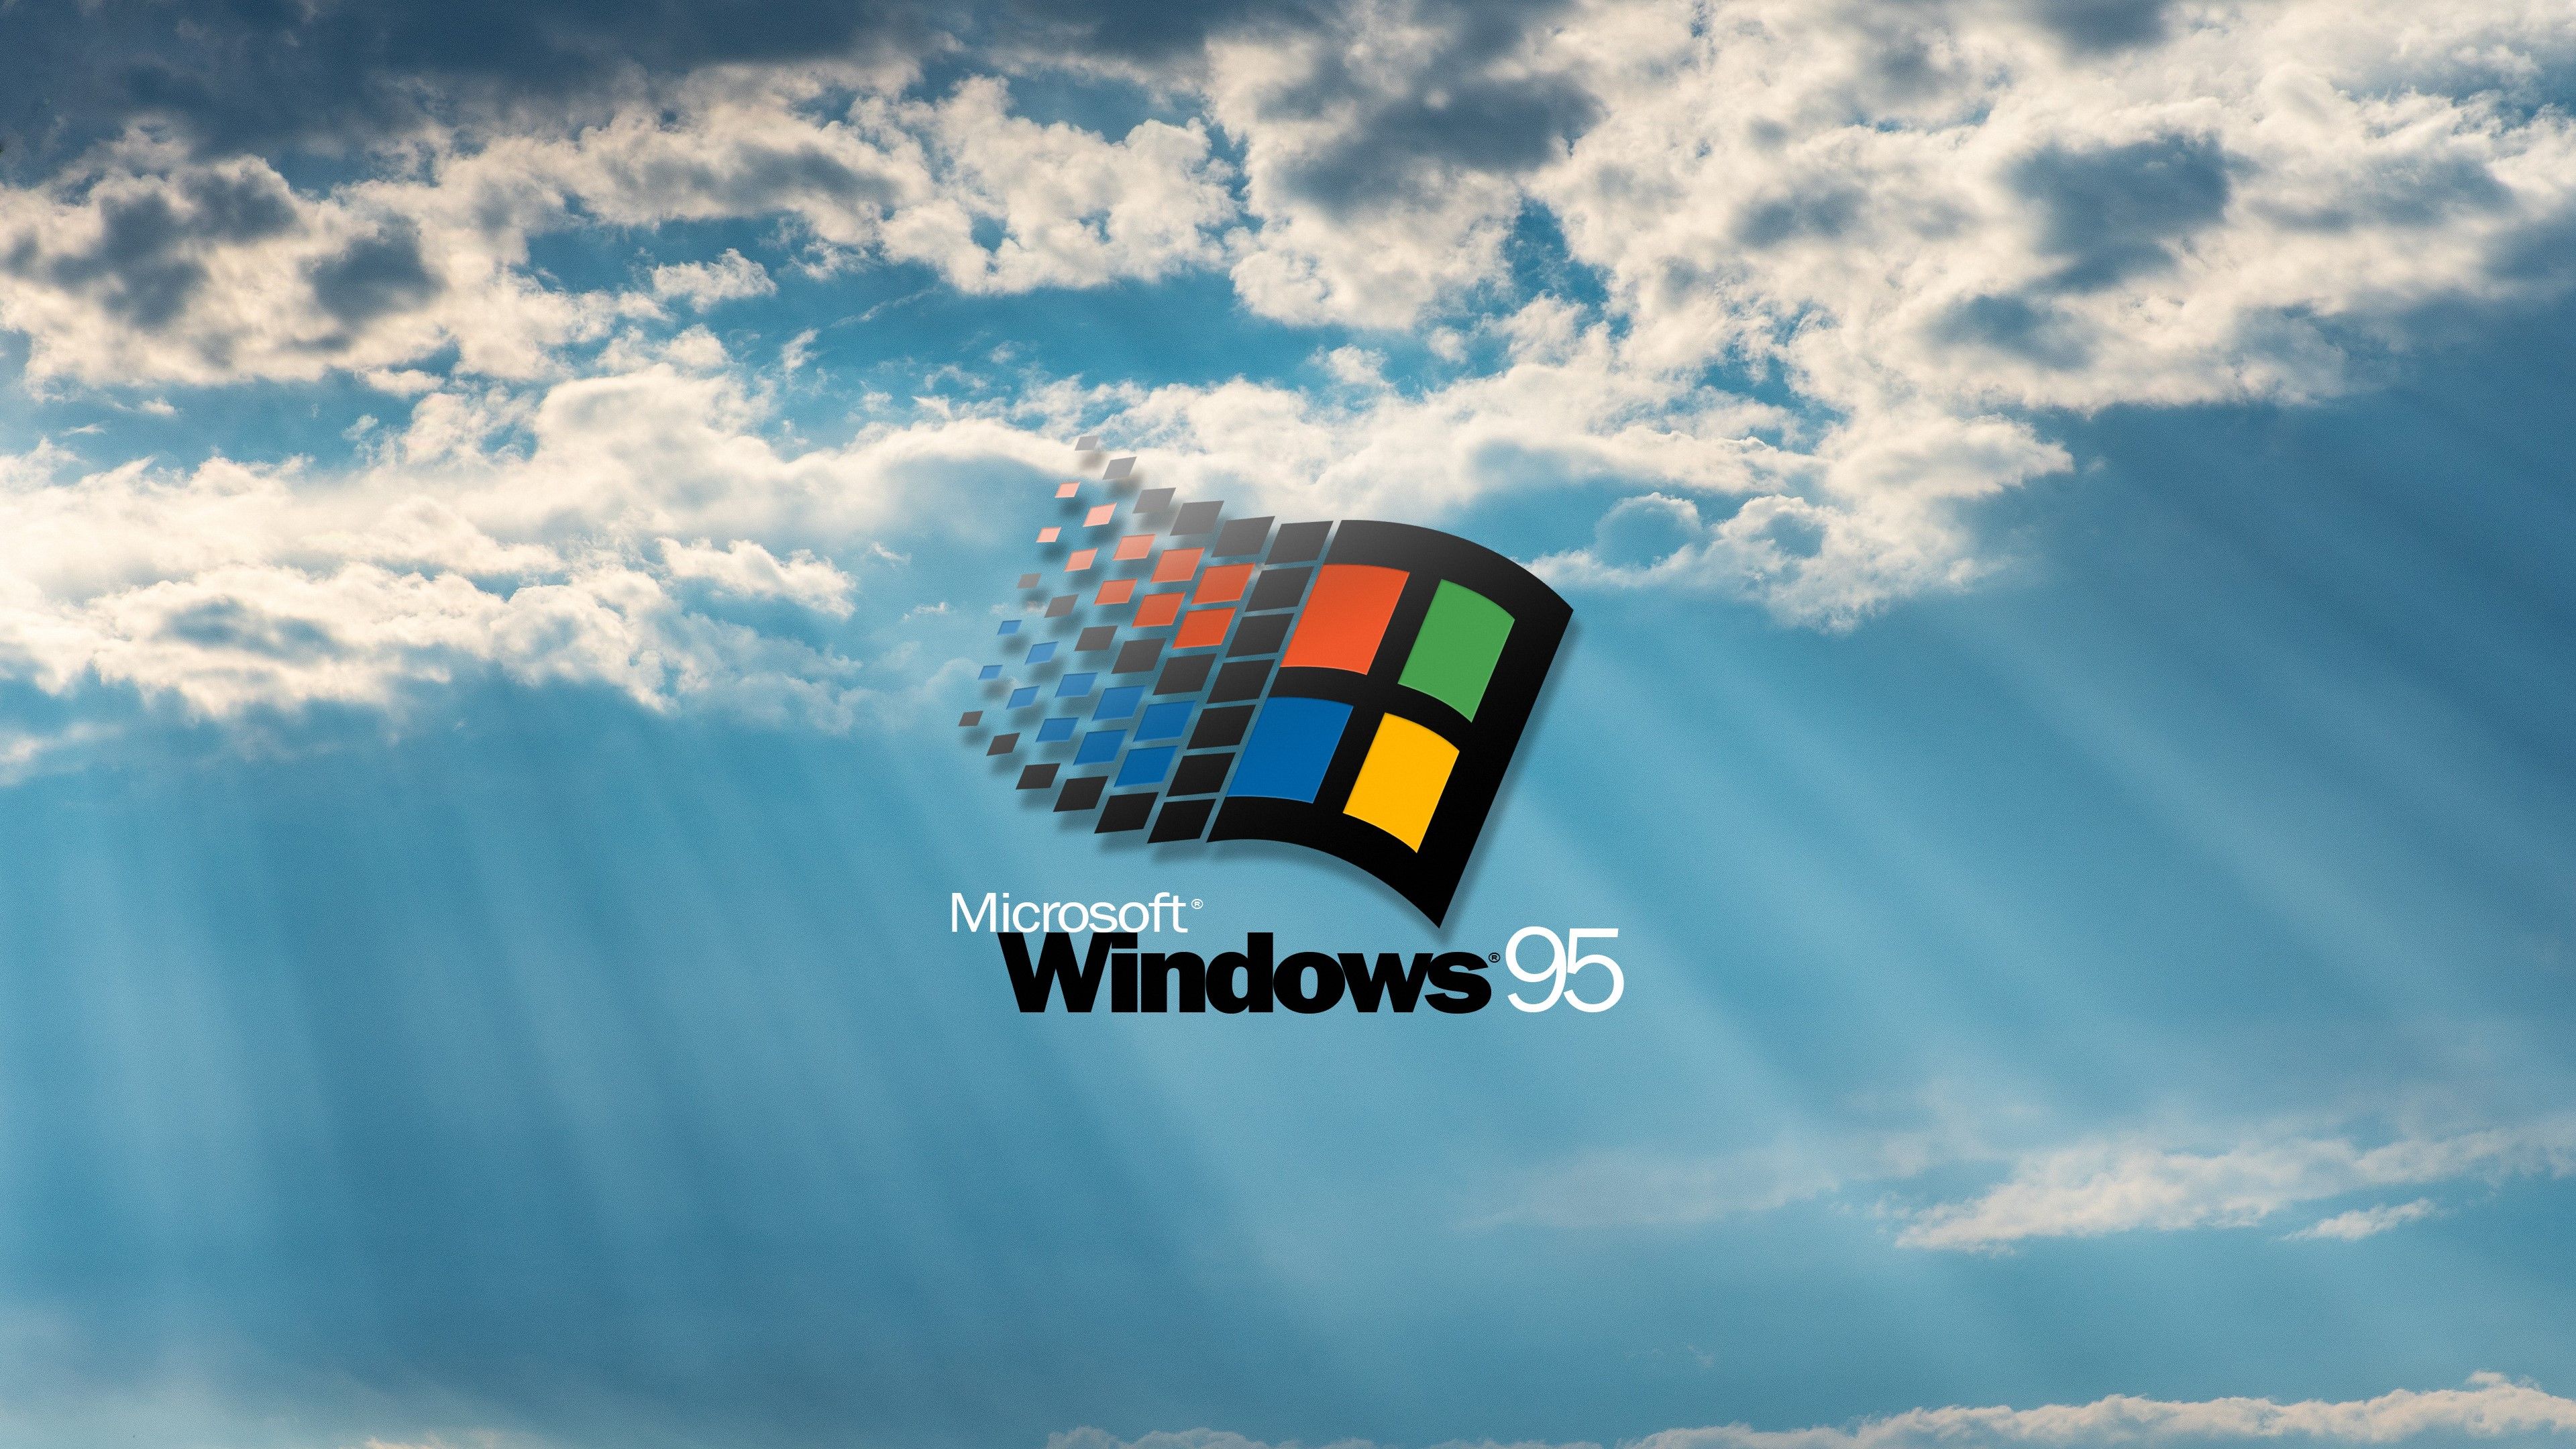 Windows 95 wallpaper with the sun shining through the clouds - Windows 95